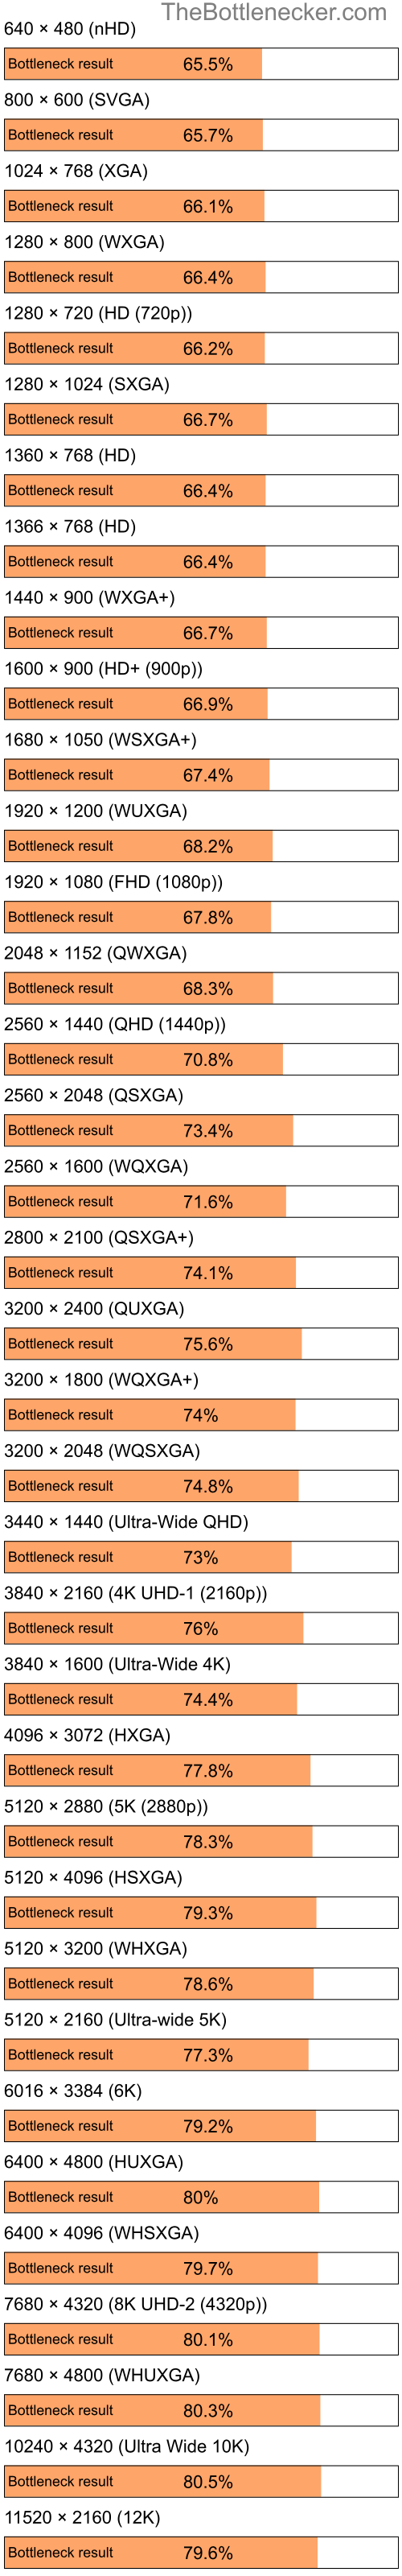 Bottleneck results by resolution for Intel Pentium 4 and AMD Mobility Radeon HD 4200 in General Tasks